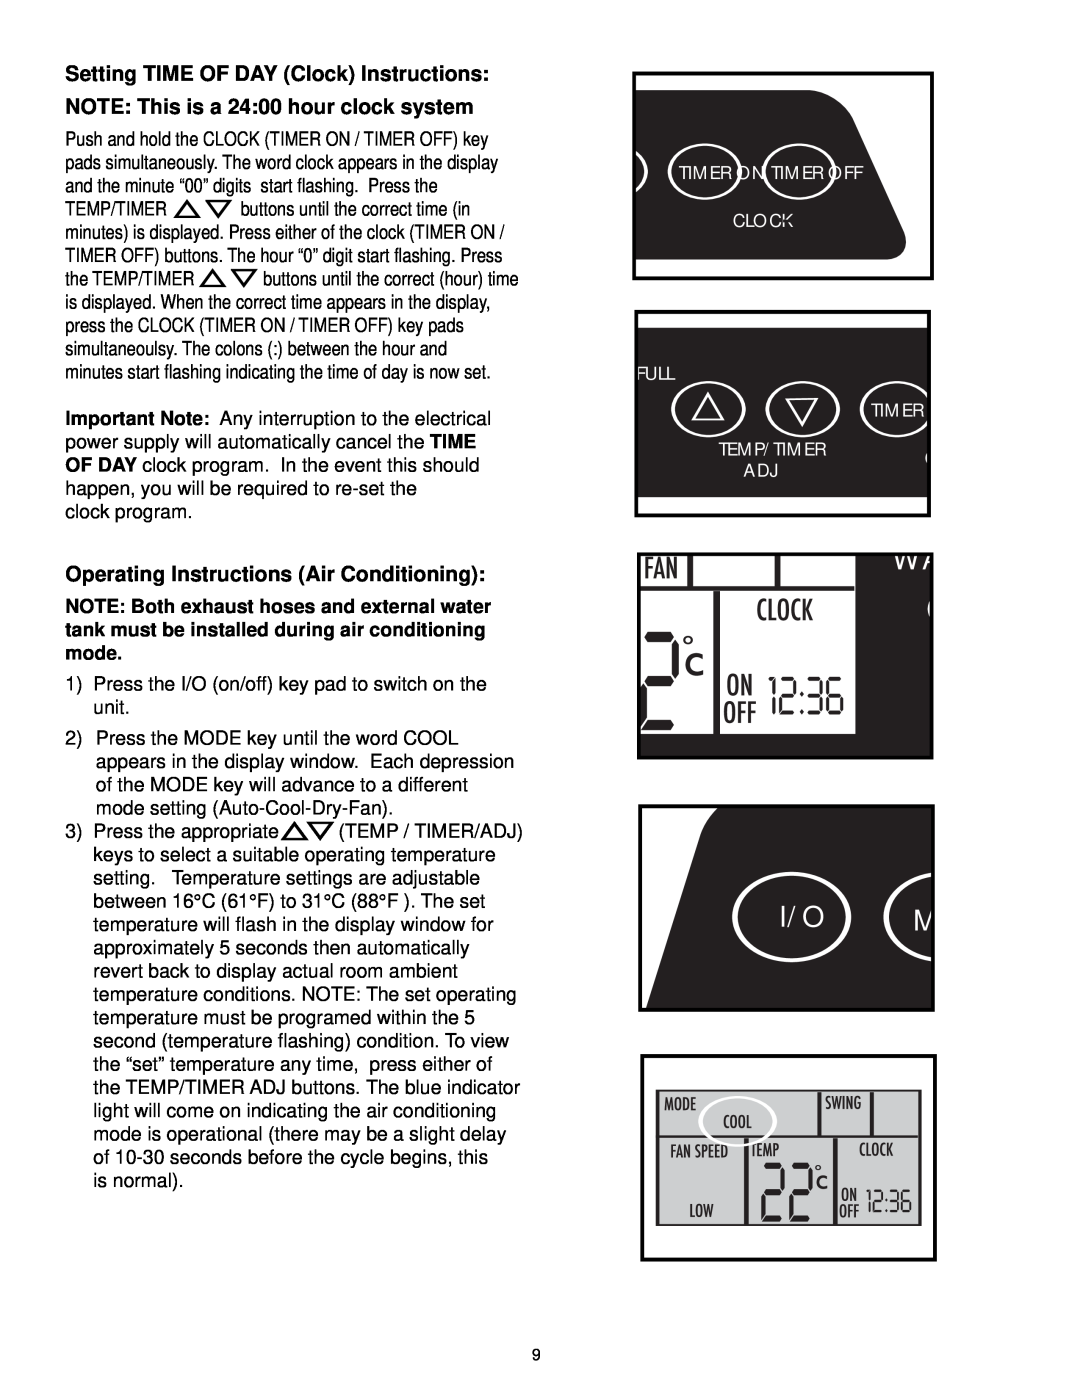 Danby DPAC10030 manual Setting TIME OF DAY Clock Instructions, NOTE This is a 2400 hour clock system, mode 